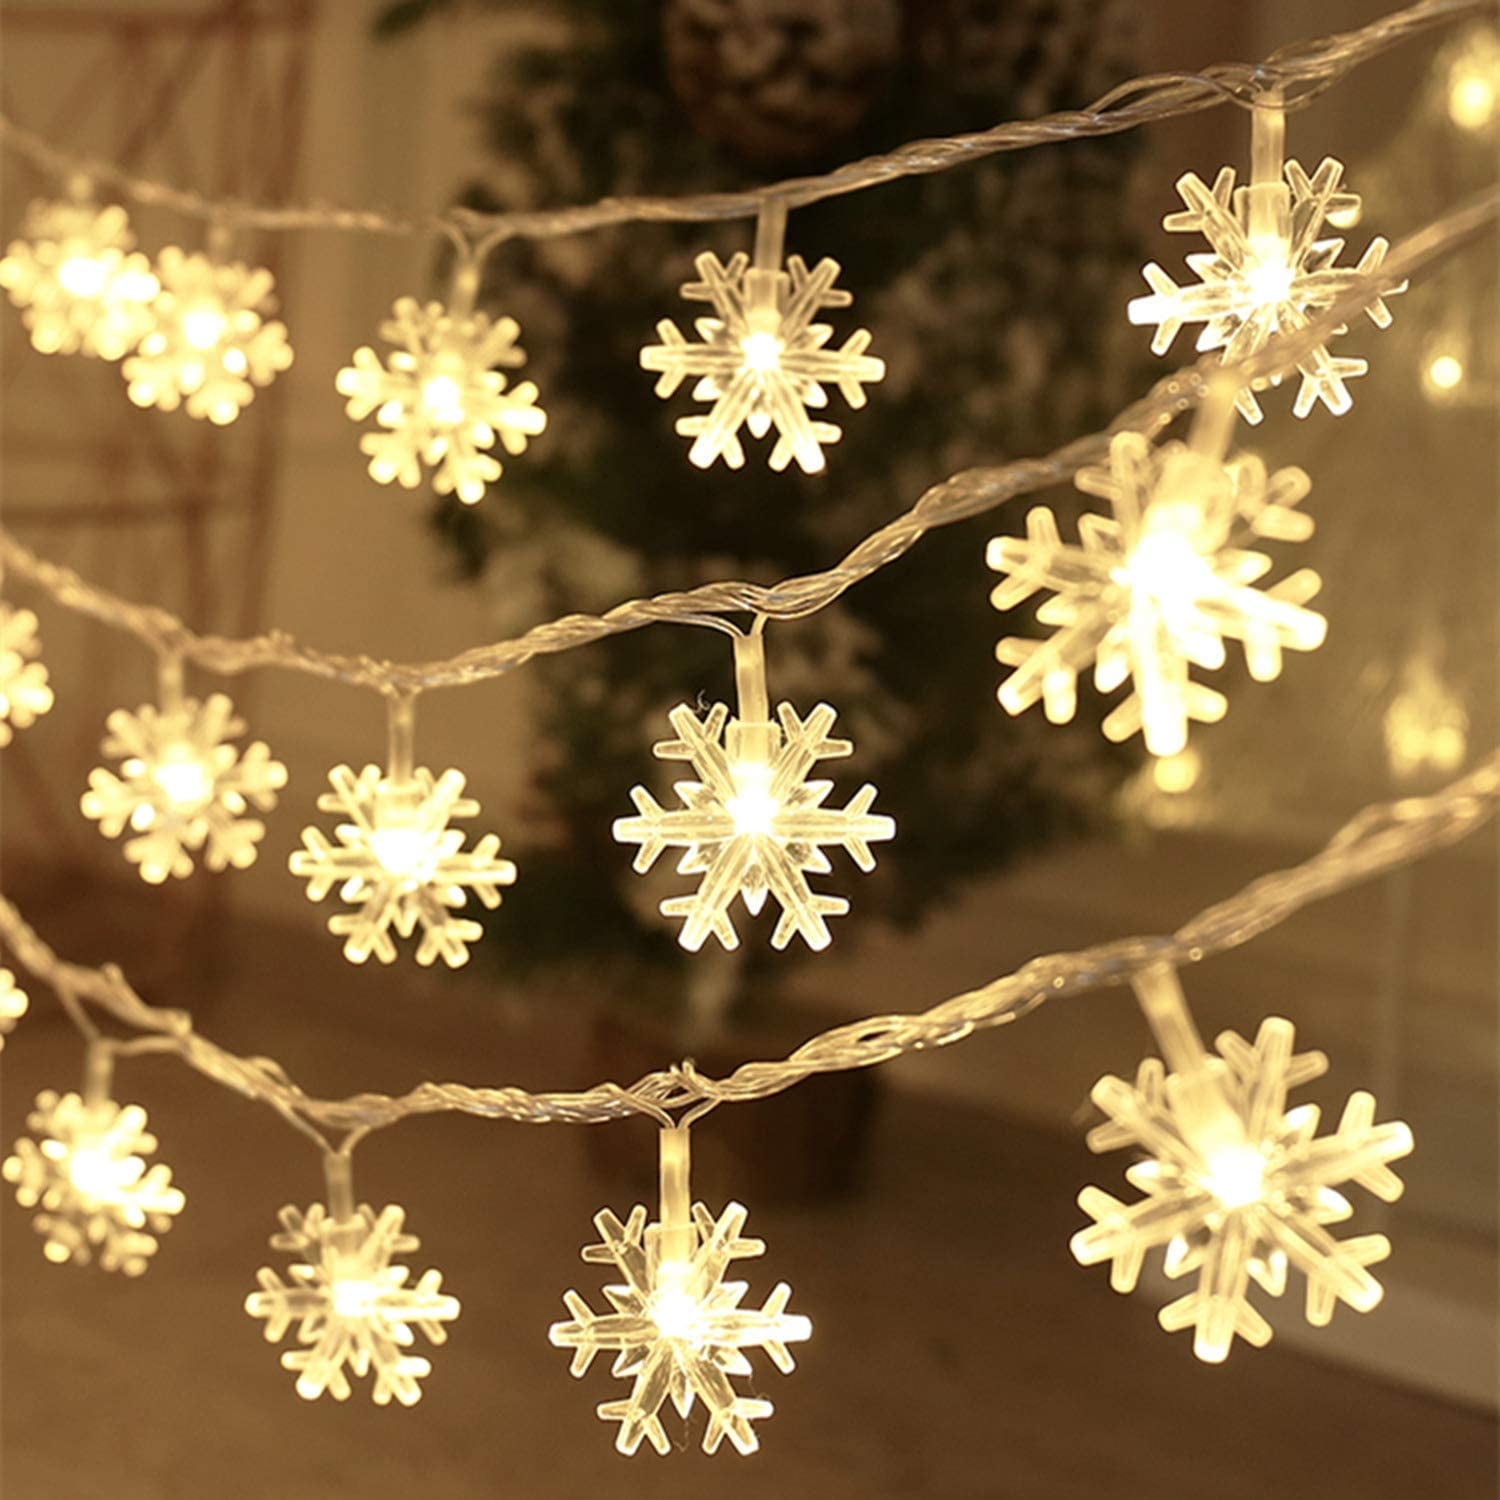 WARM COOL WHITE LED FAIRY LIGHTS BATTERY POWERED STRING CHRISTMAS XMAS OUTDOOR 